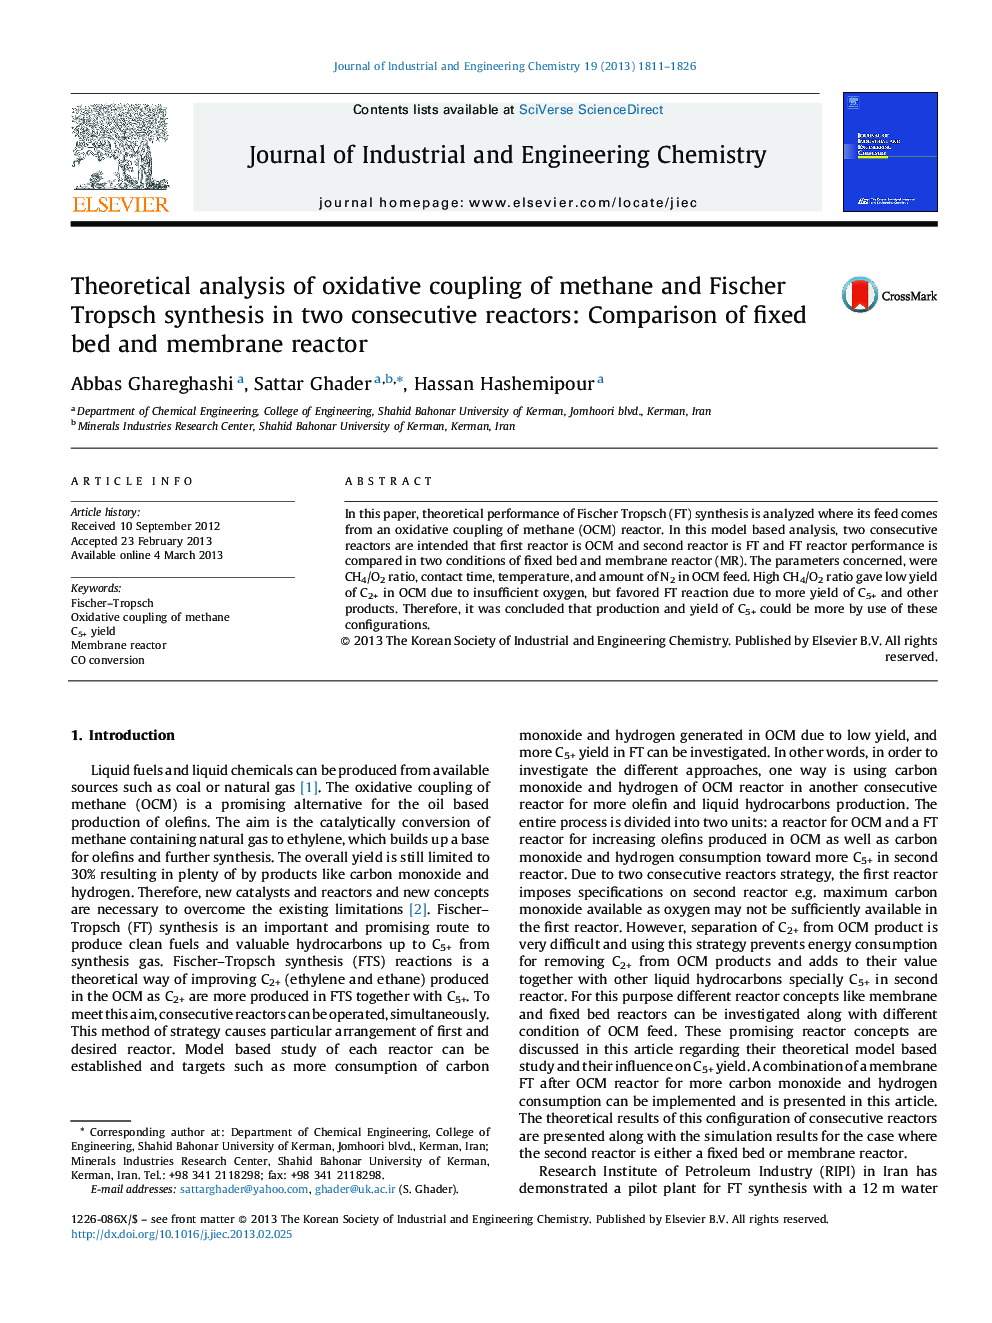 Theoretical analysis of oxidative coupling of methane and Fischer Tropsch synthesis in two consecutive reactors: Comparison of fixed bed and membrane reactor